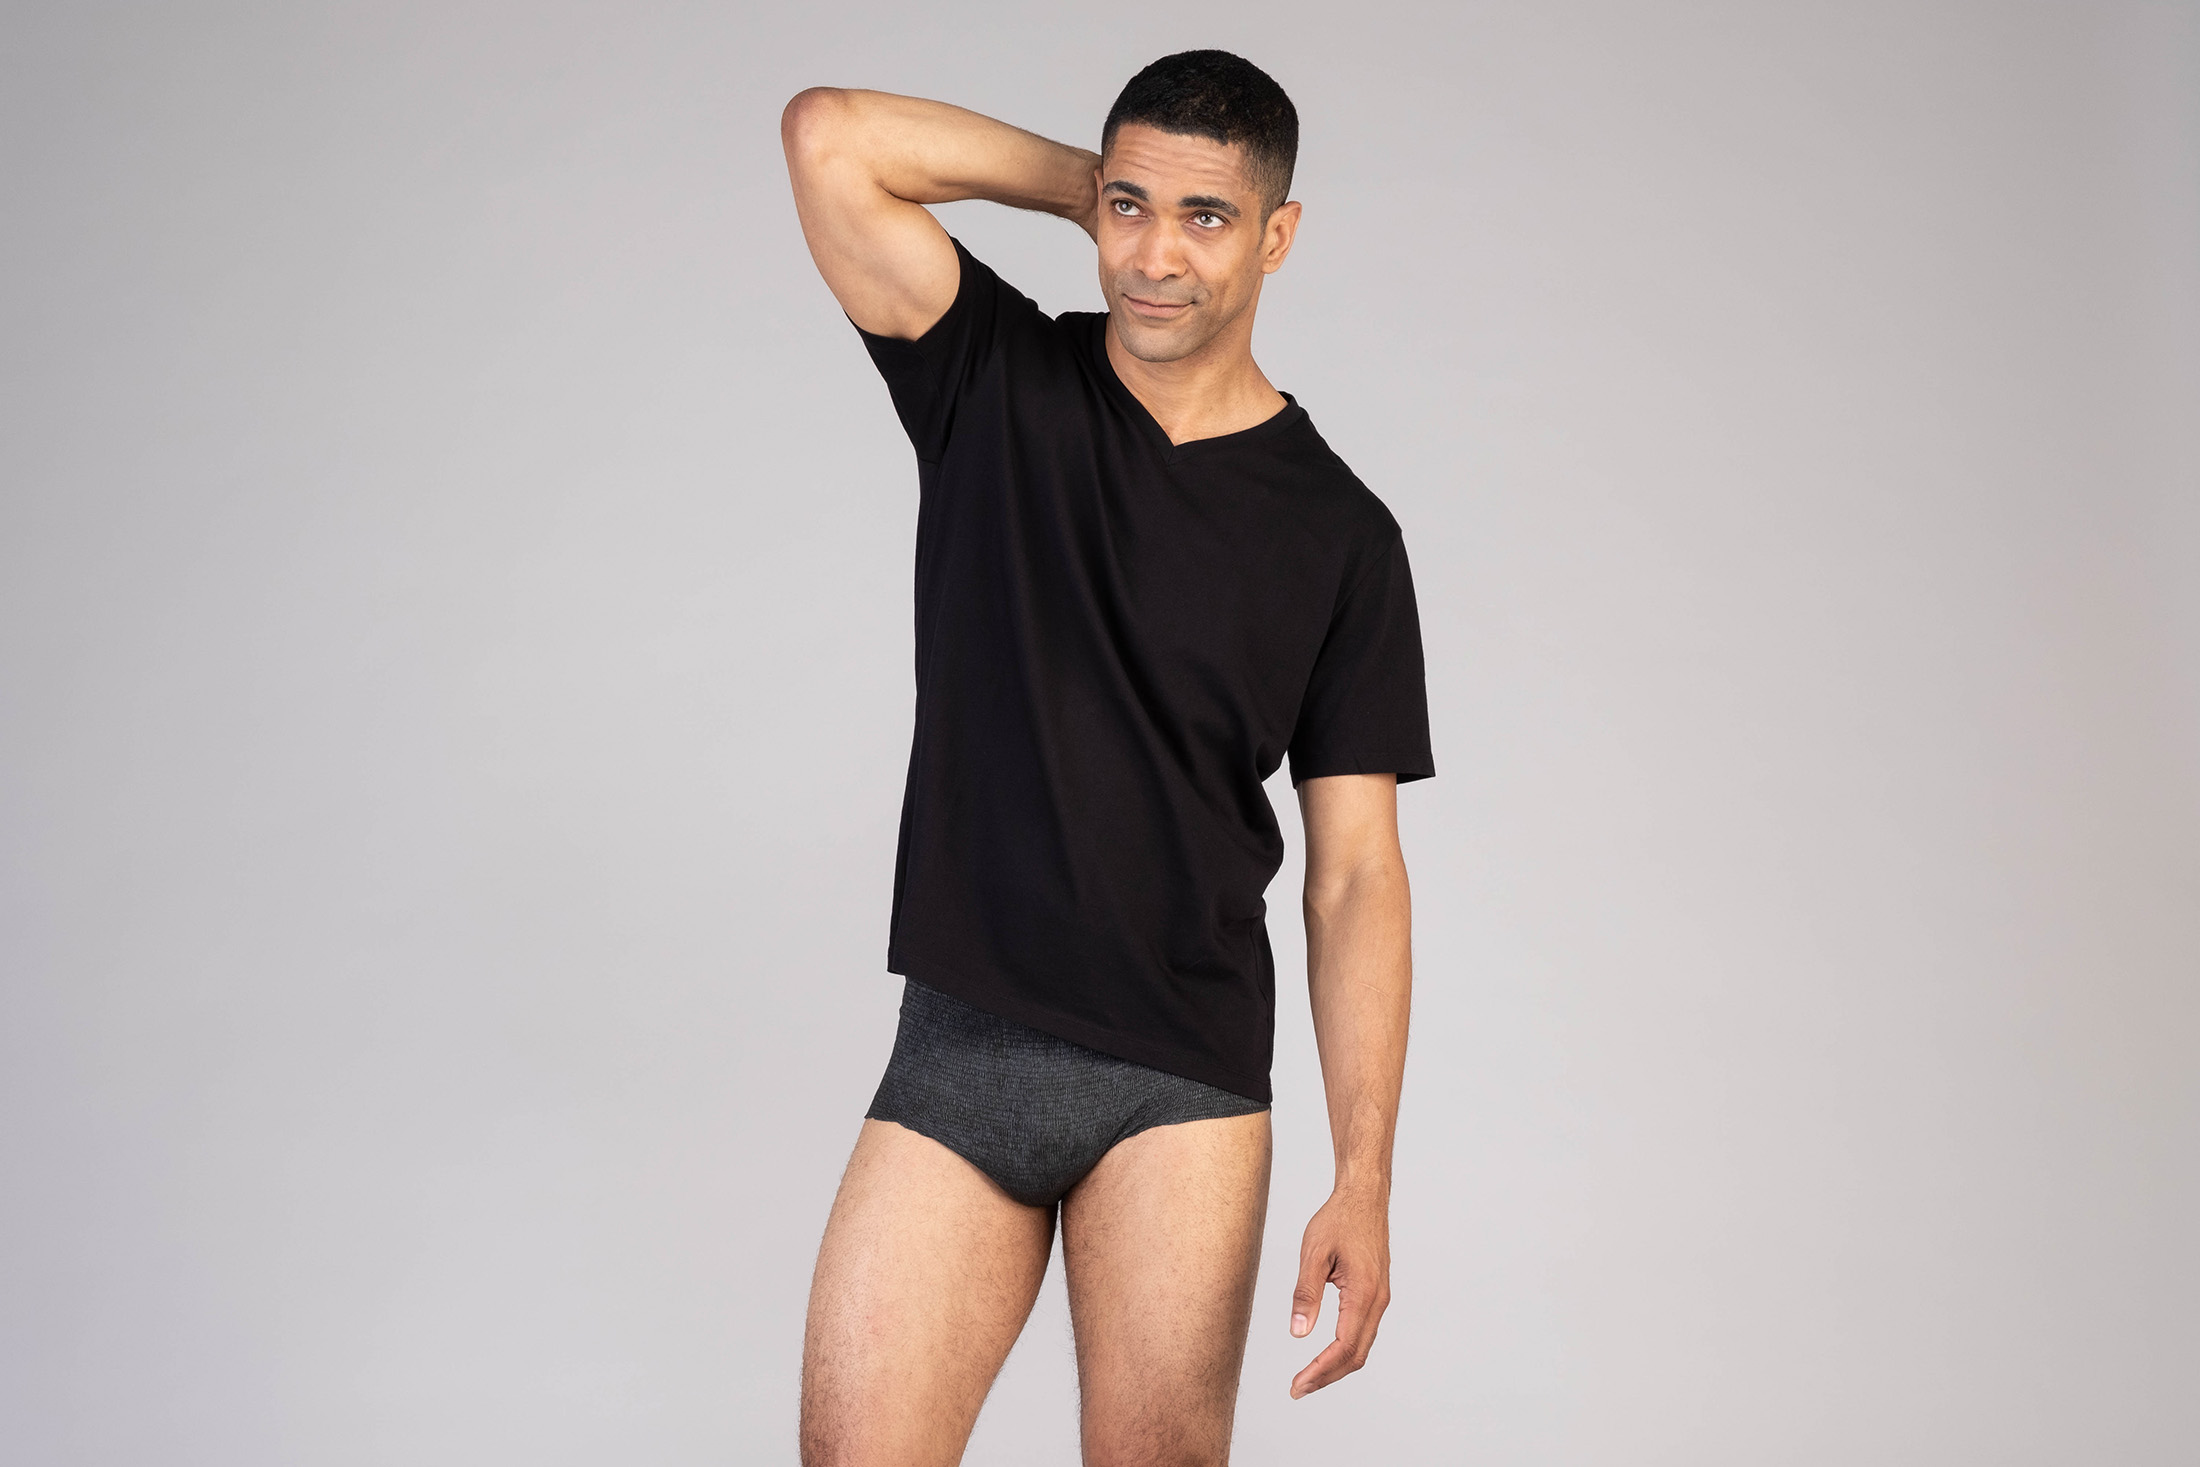 This Startup Is Opening an Online Boutique for Adult Diapers